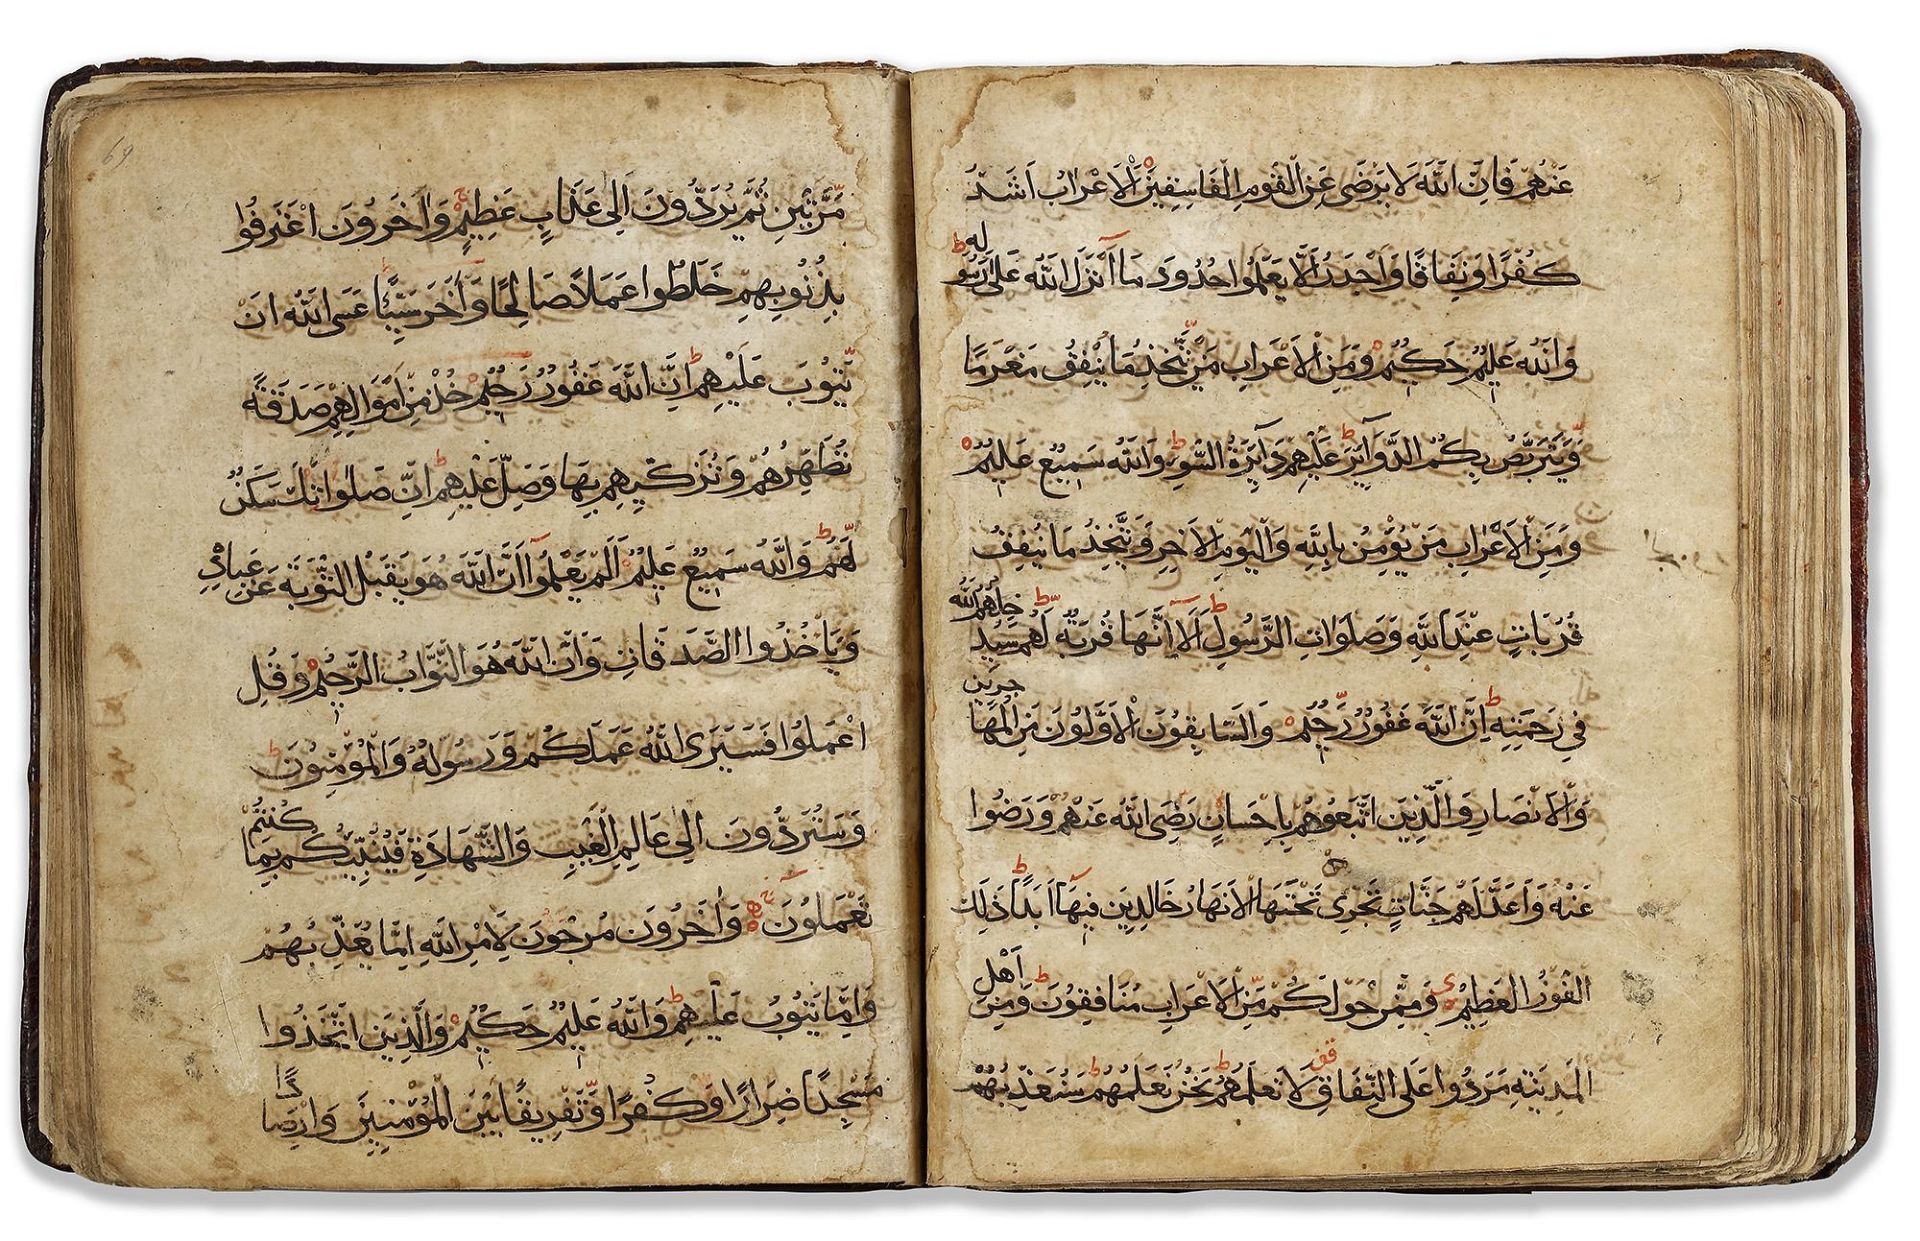 A QURAN JUZ, CENTRAL ASIA, 16TH-17TH CENTURY - Image 5 of 6